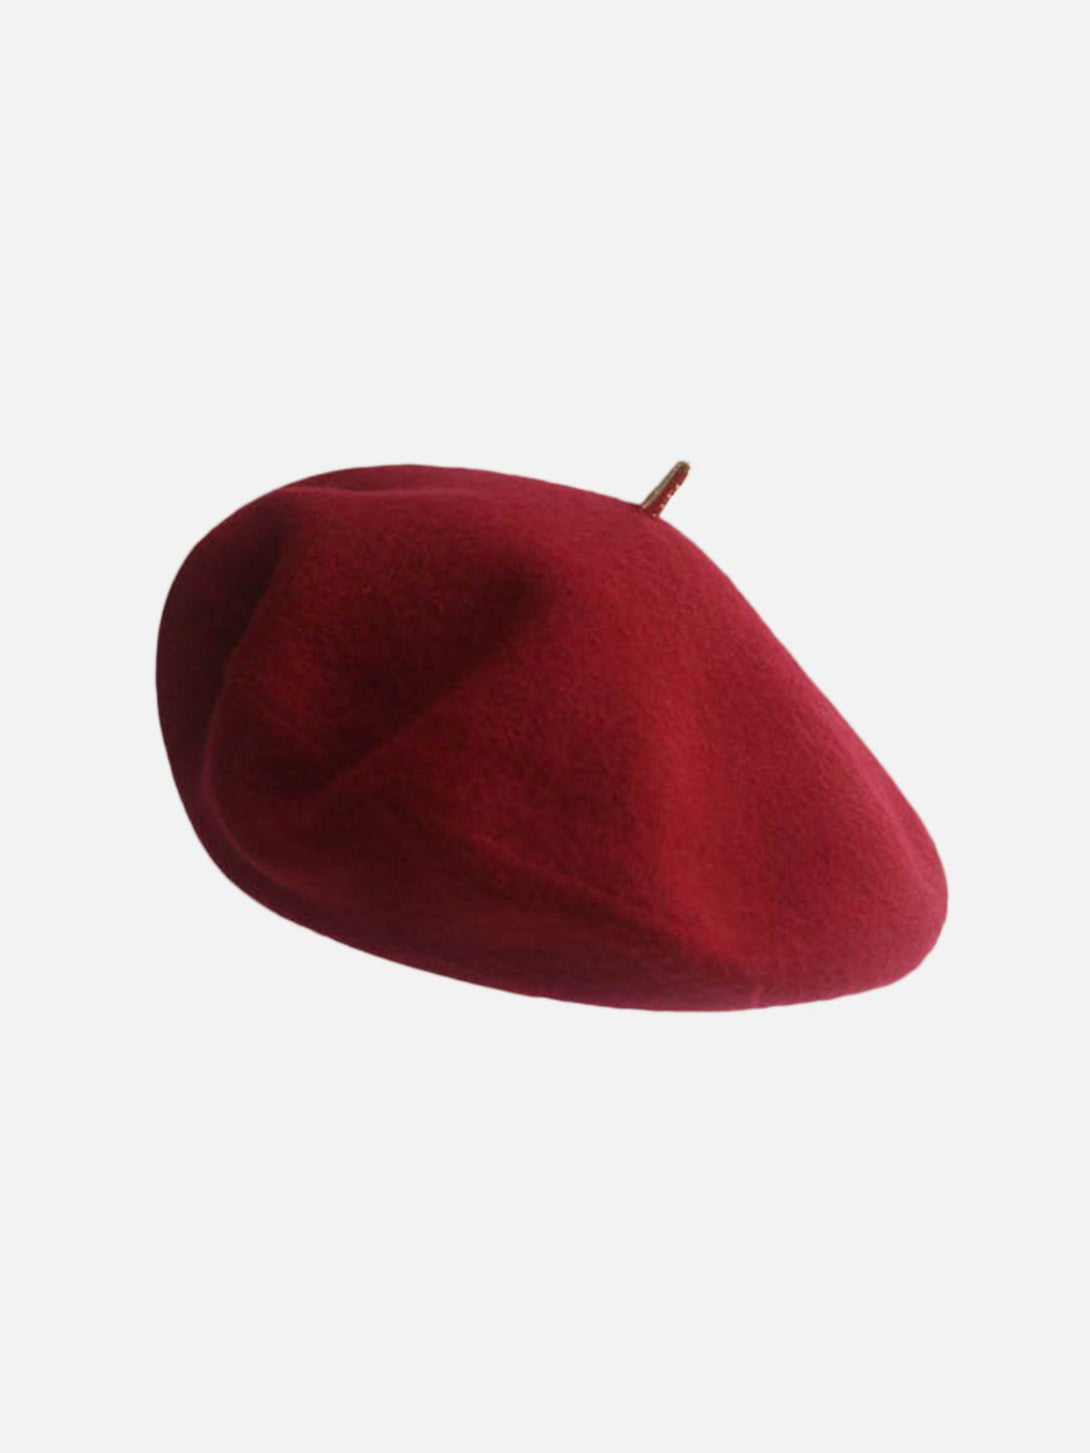 Majesda® - Solid Color Wool Versatile Hat- Outfit Ideas - Streetwear Fashion - majesda.com